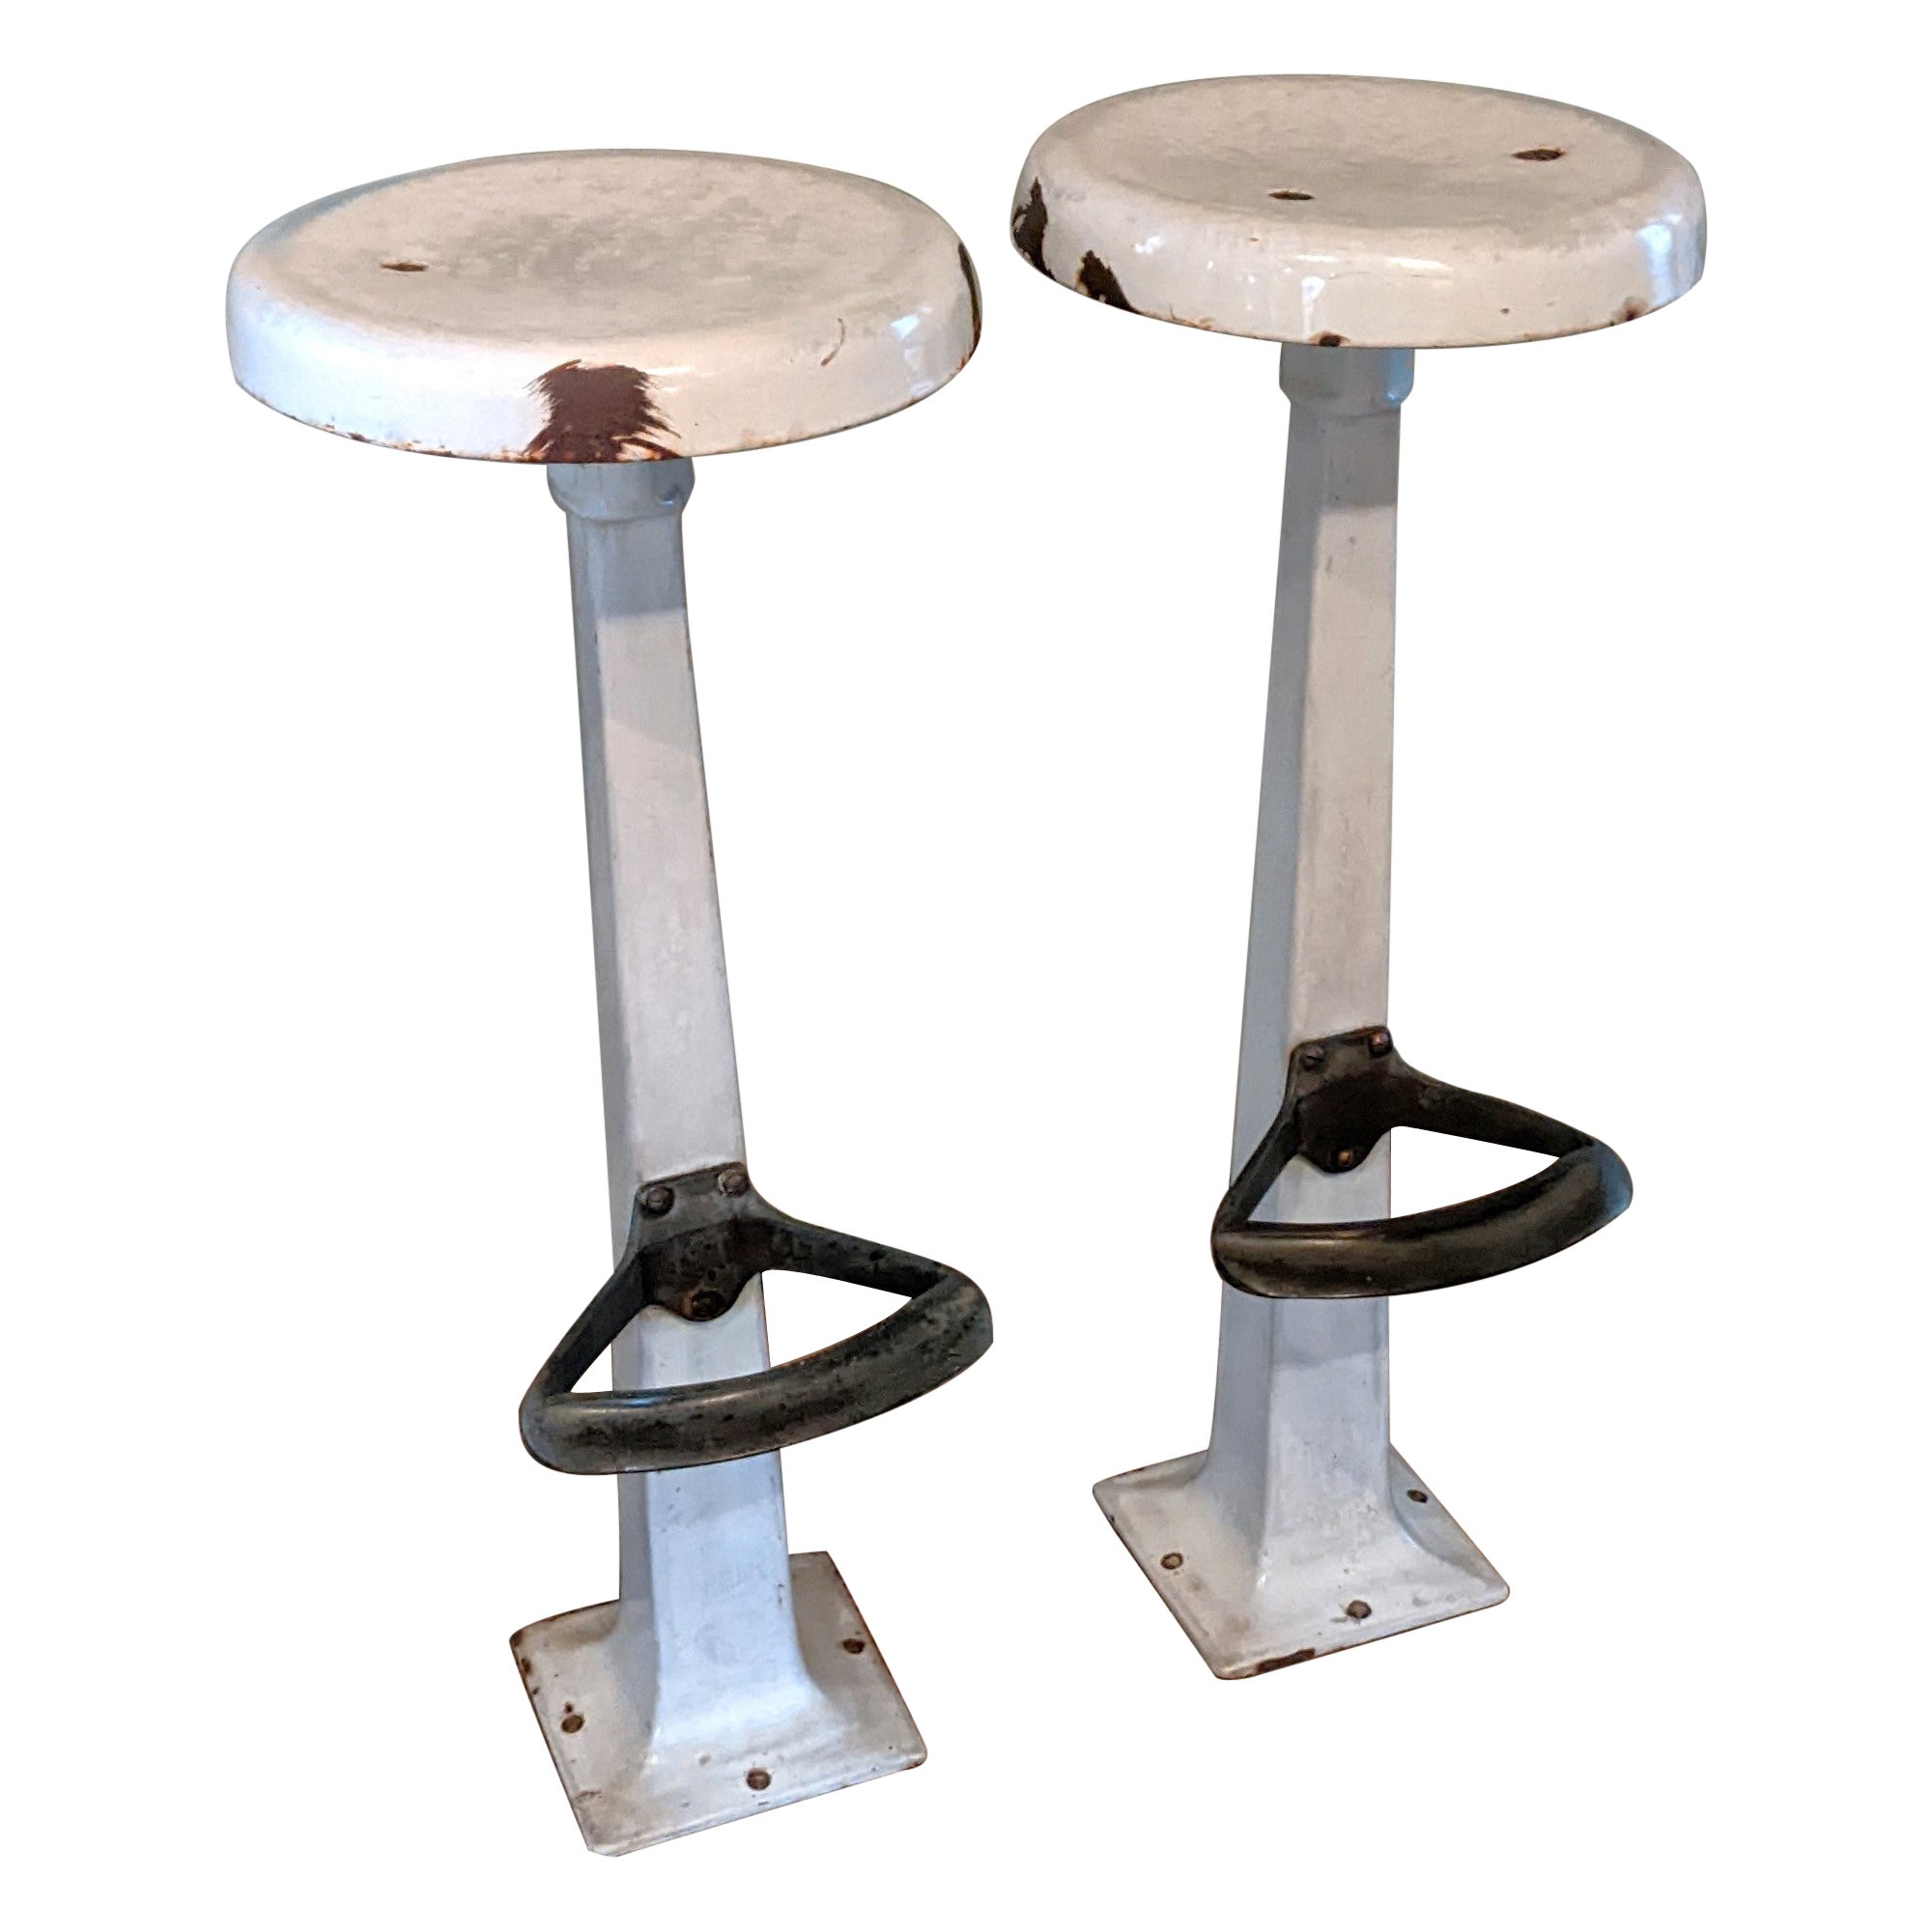 Vintage Counter Stools